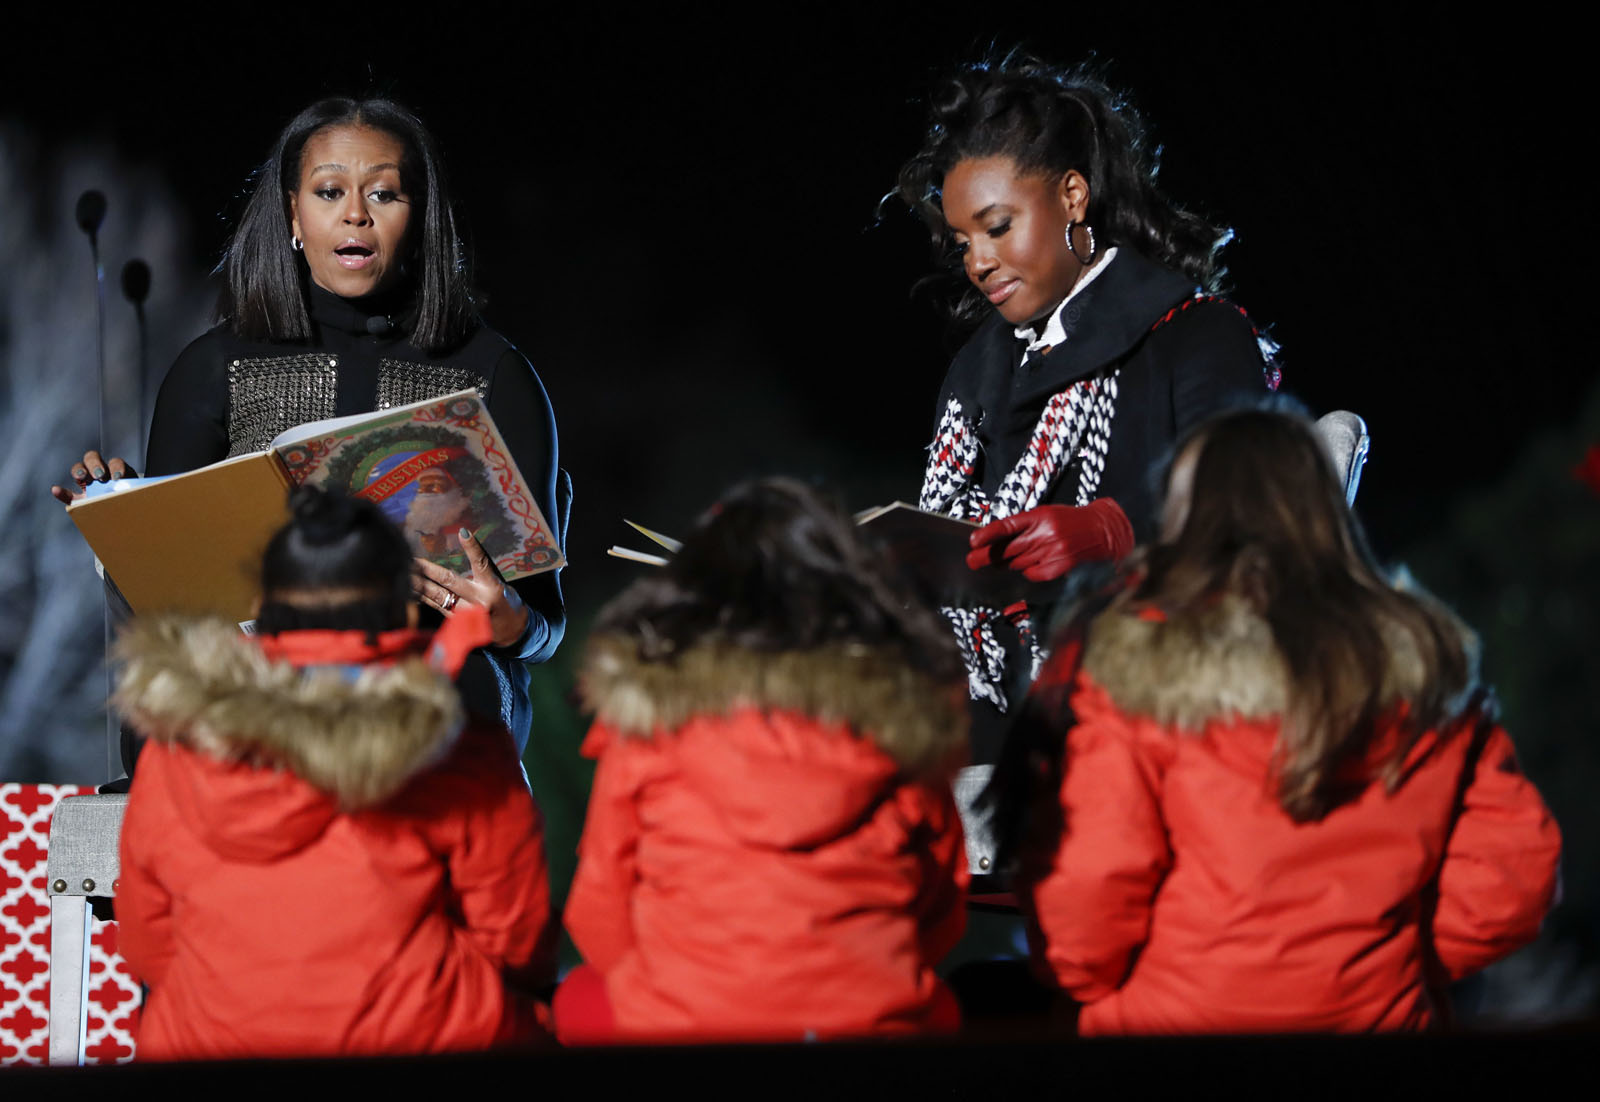 First lady Michelle Obama, left, and Olympic medal winner Simone Manuel, right, read "Twas The Night Before Christmas" to children on stage during the 2016 National Christmas Tree lighting ceremony at the Ellipse near the White House in Washington, Thursday, Dec. 1, 2016. (AP Photo/Pablo Martinez Monsivais)